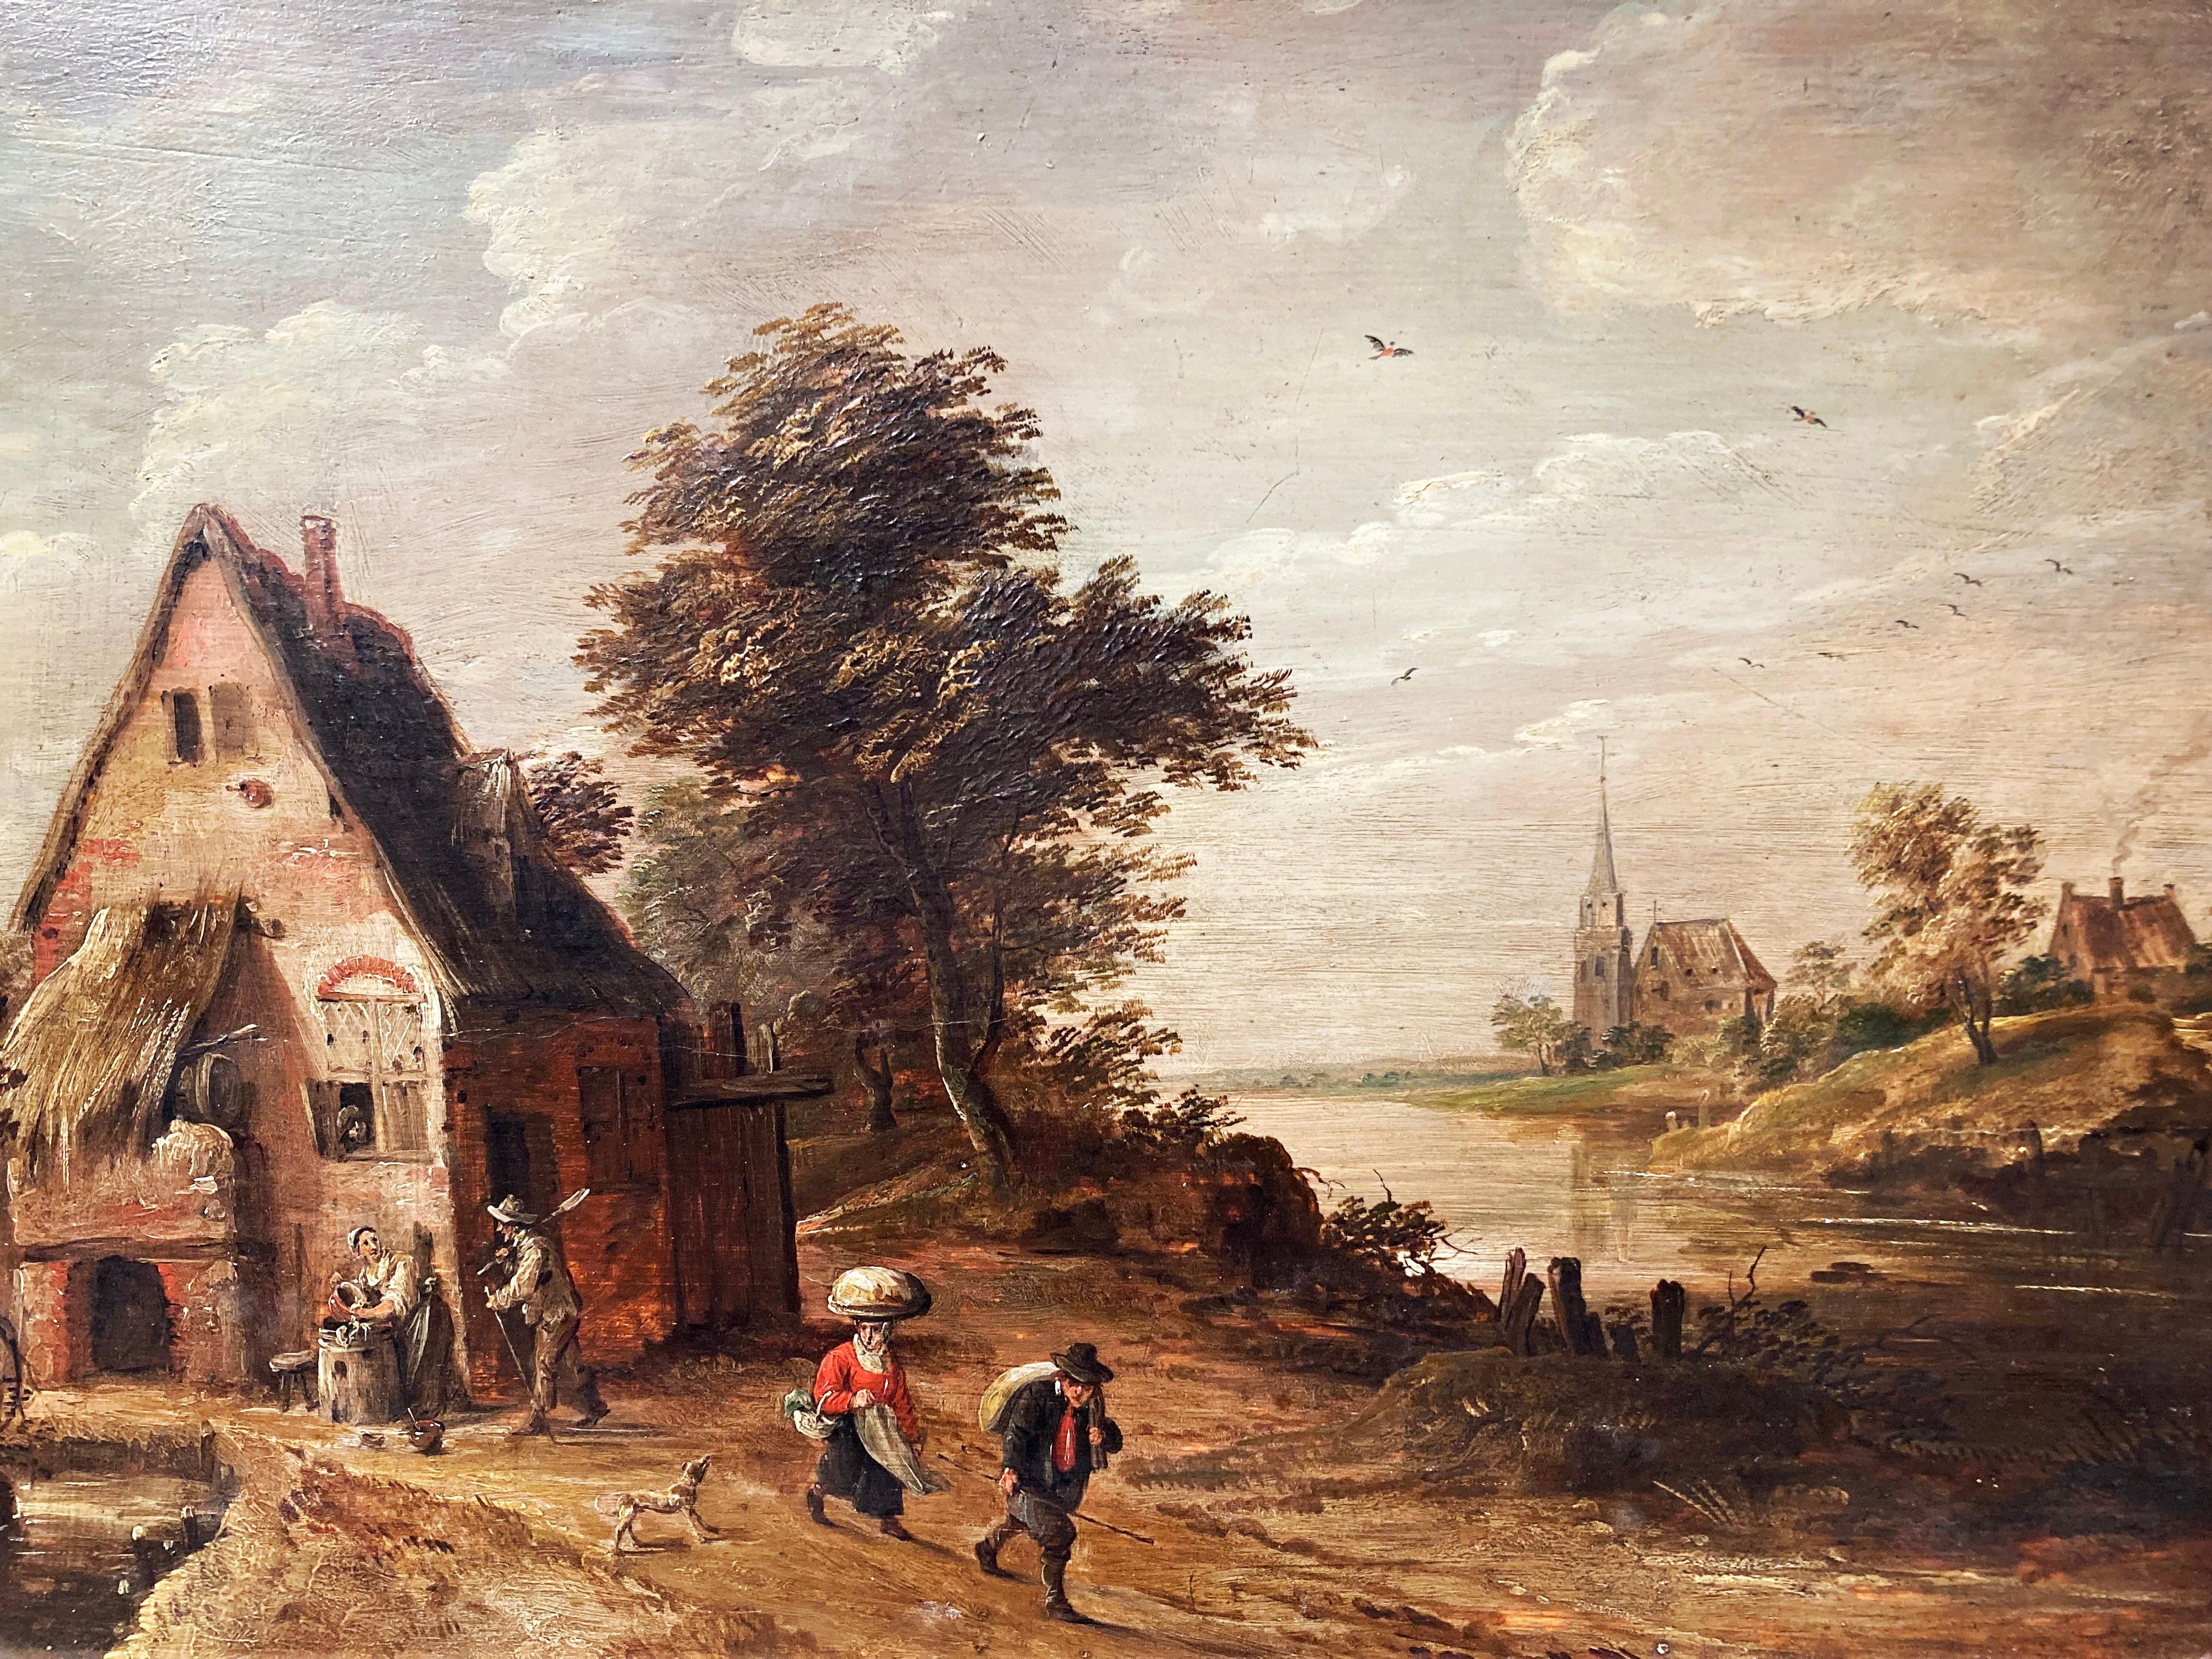 Circle of David Teniers, Landscape with Peasants by an Inn and a River, Dutch 